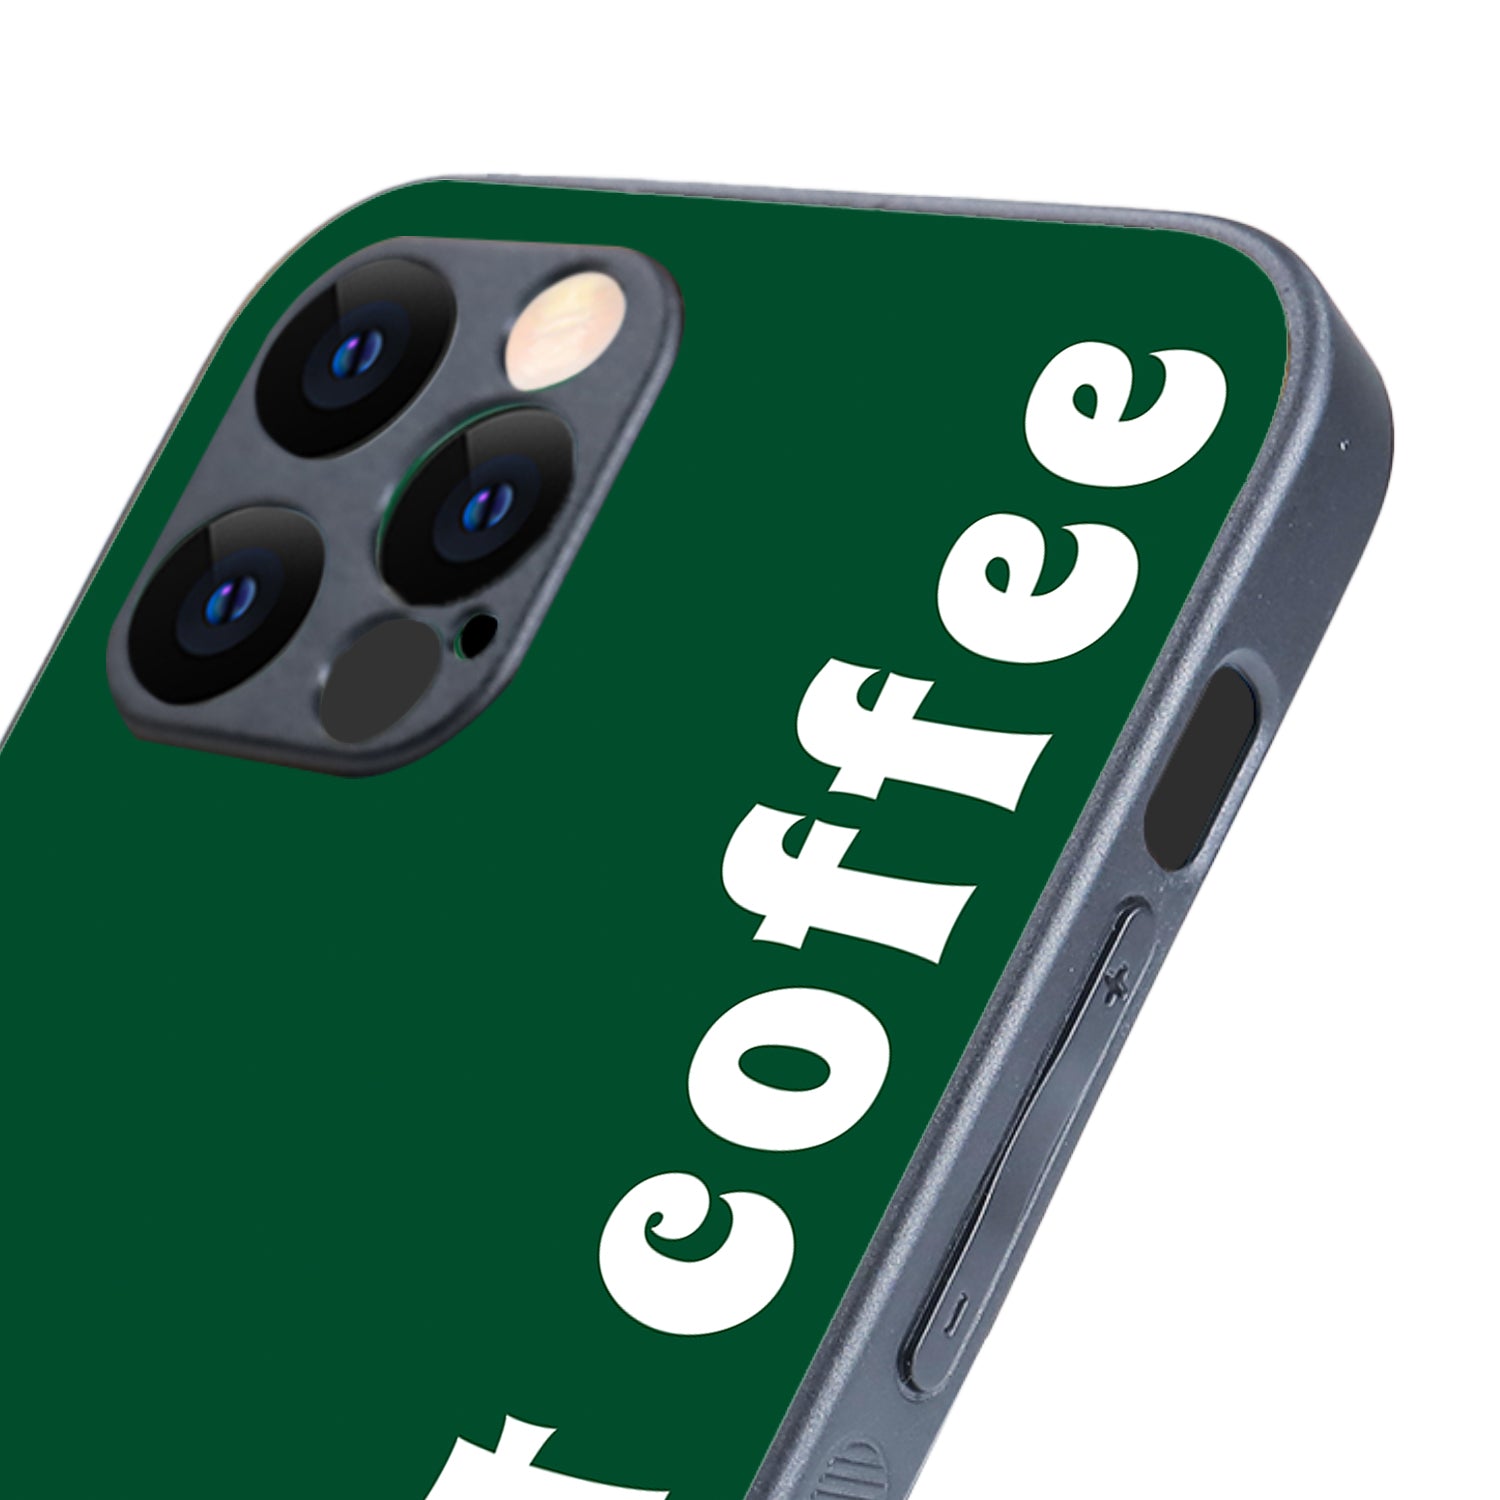 First Coffee Motivational Quotes iPhone 12 Pro Case